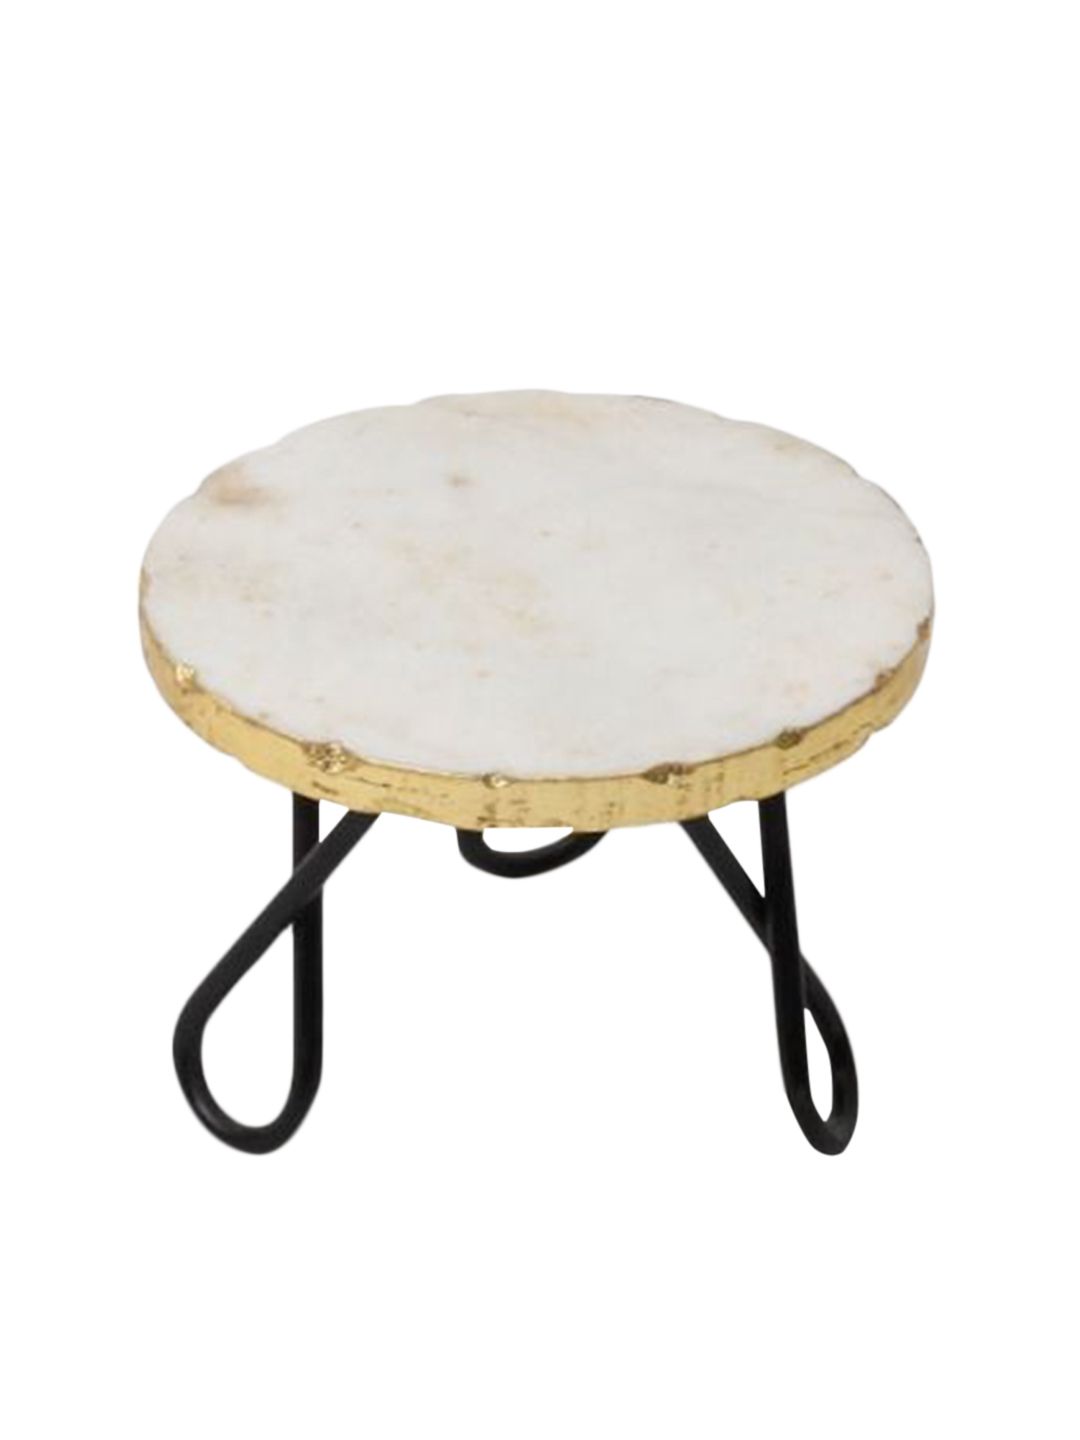 Casa Decor White Gold Foiled Marble Cake Stand Price in India